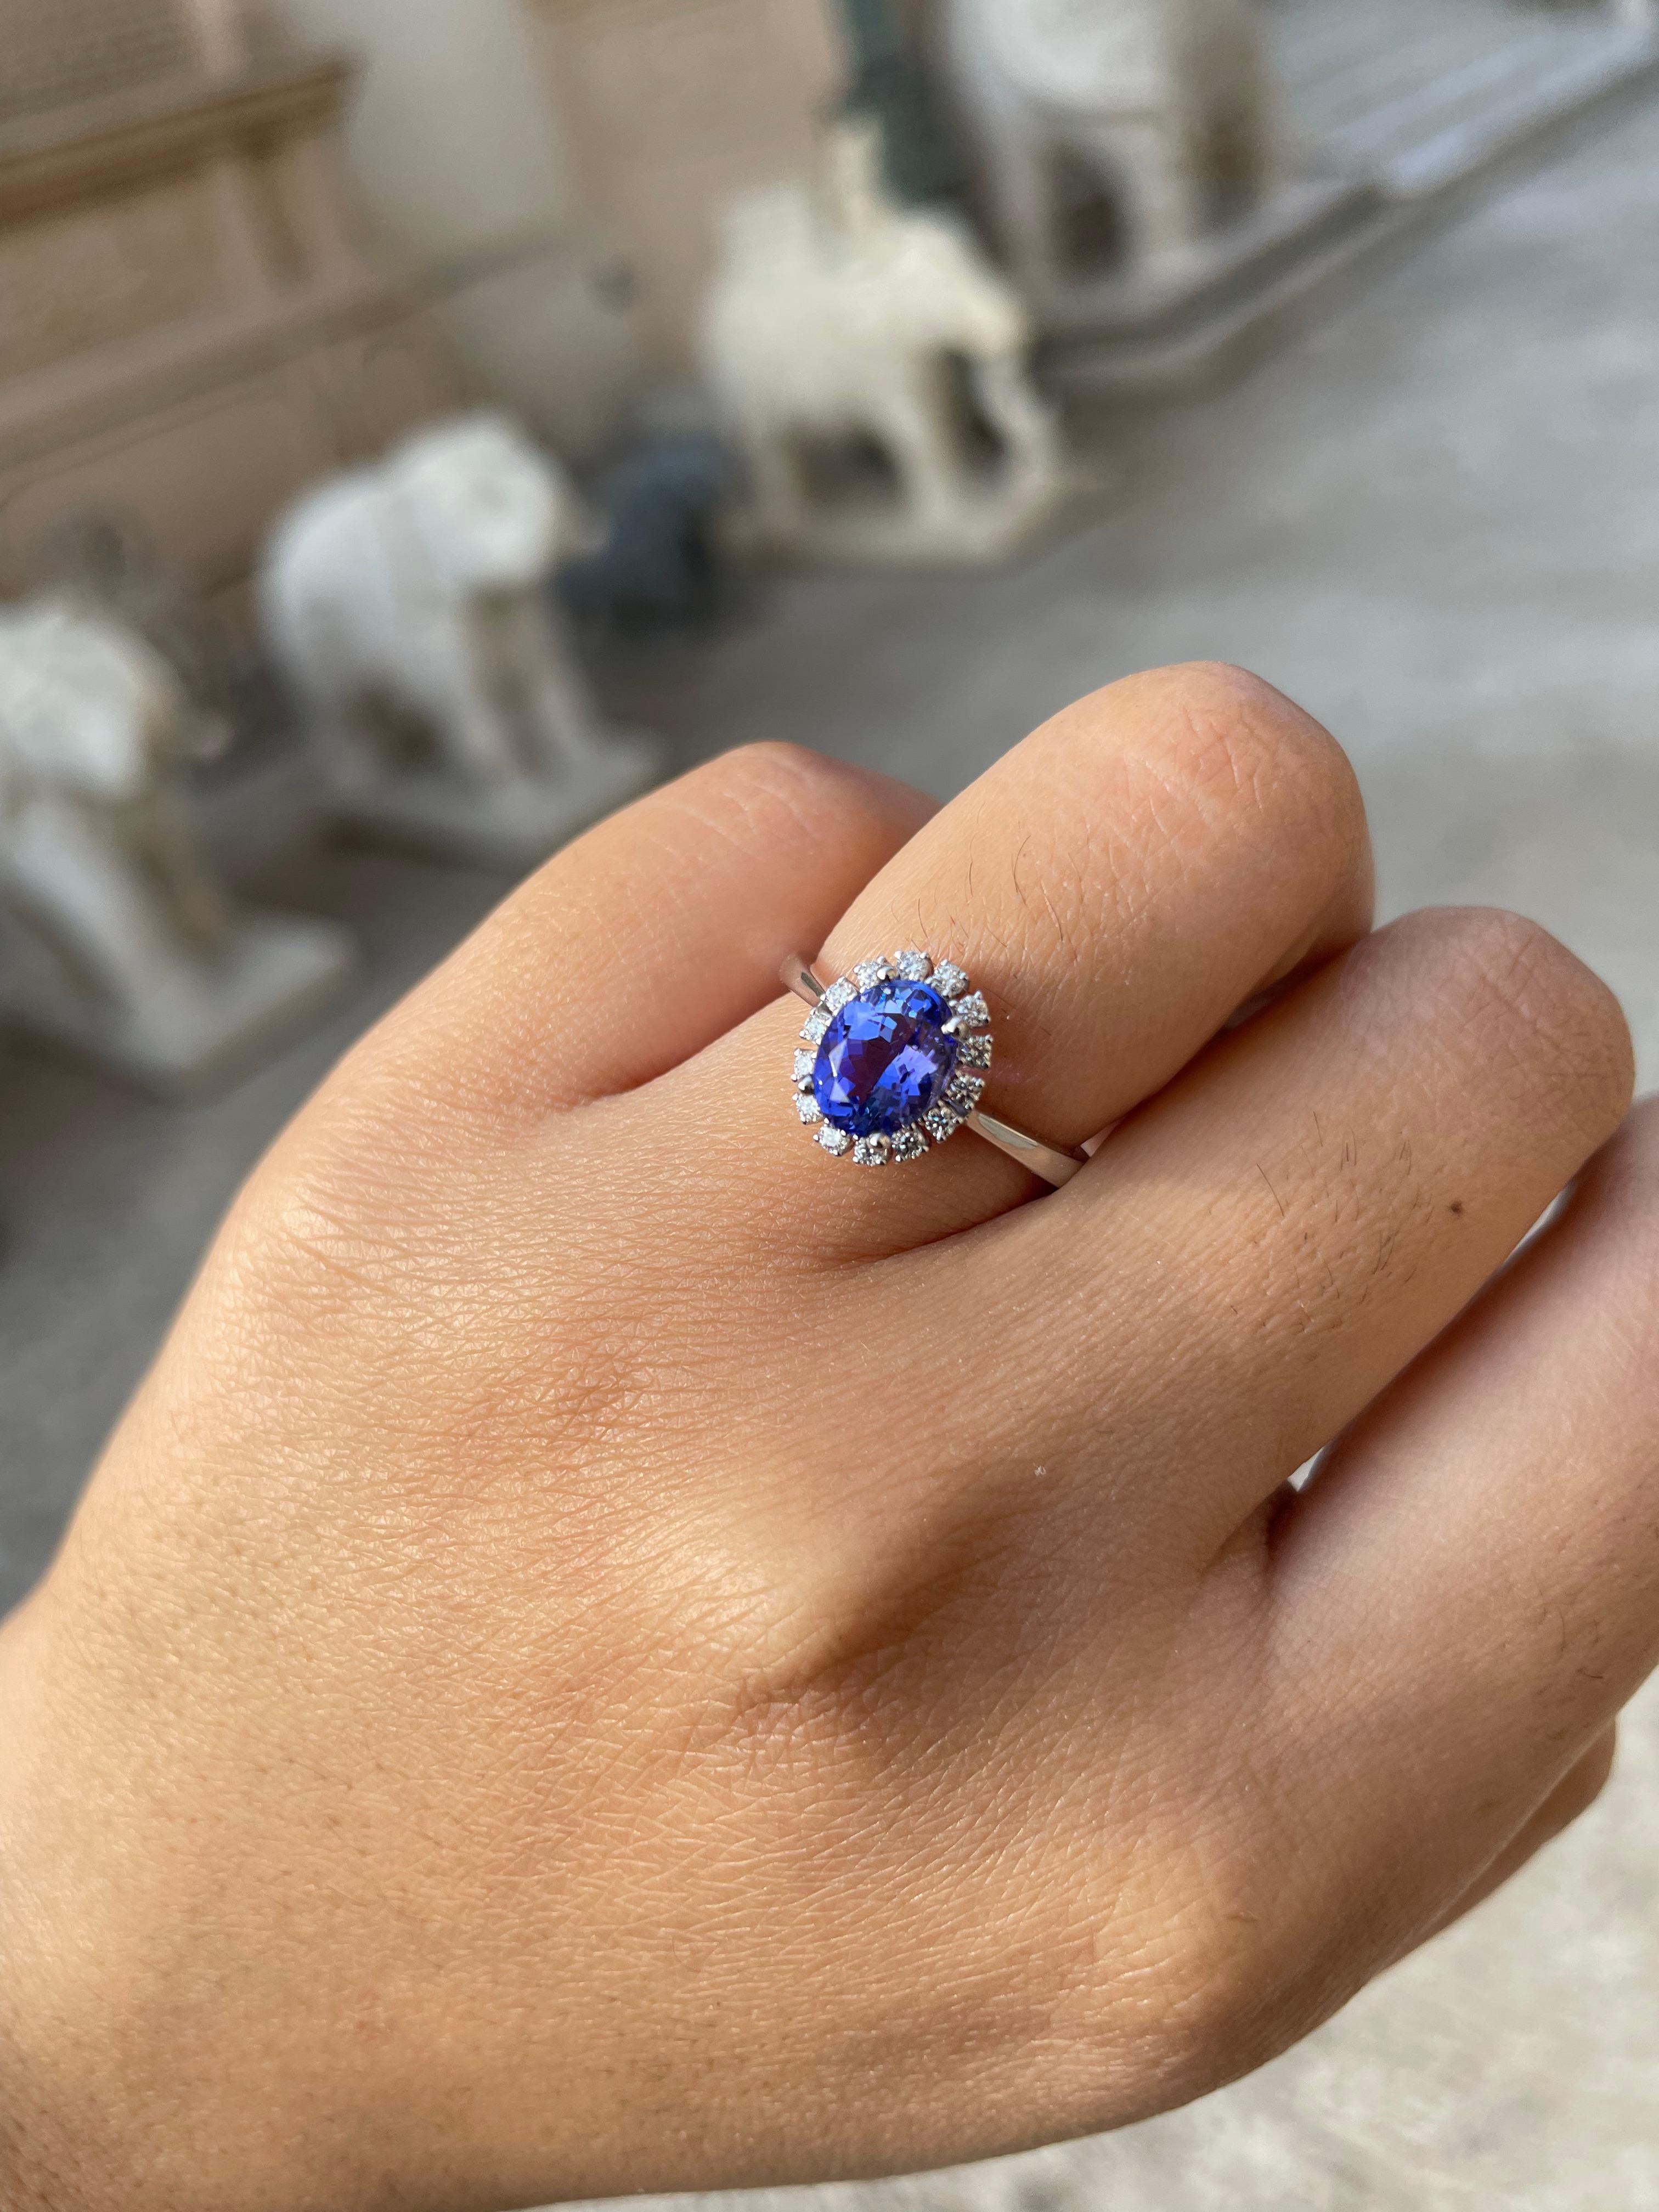 For Sale:  18k Solid White Gold Tanzanite and Diamond Ring  7